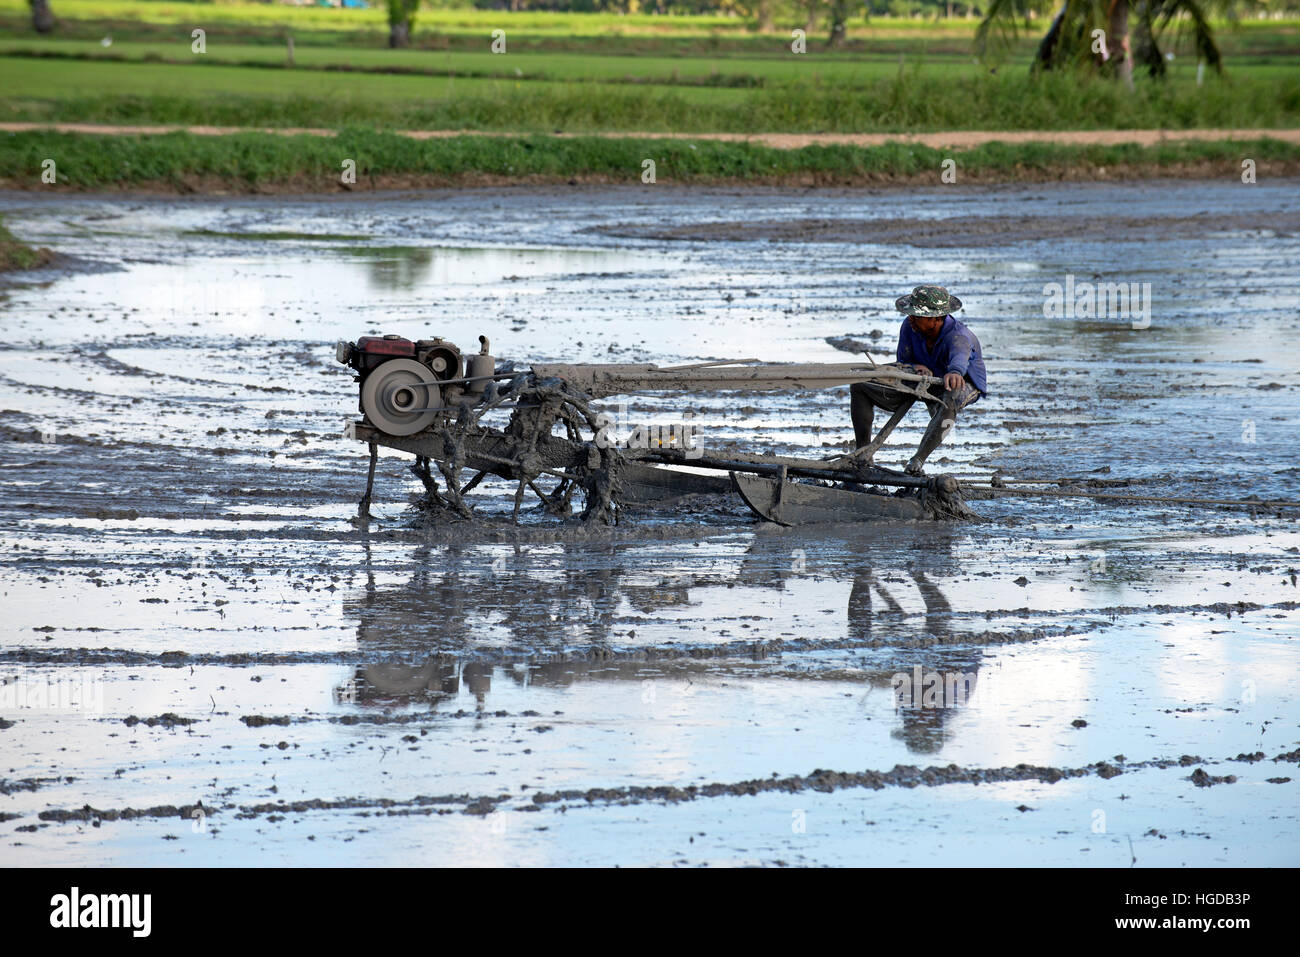 Southern Thailand, Farmer ride rice tractor for preparing the ground for rice plantation Stock Photo